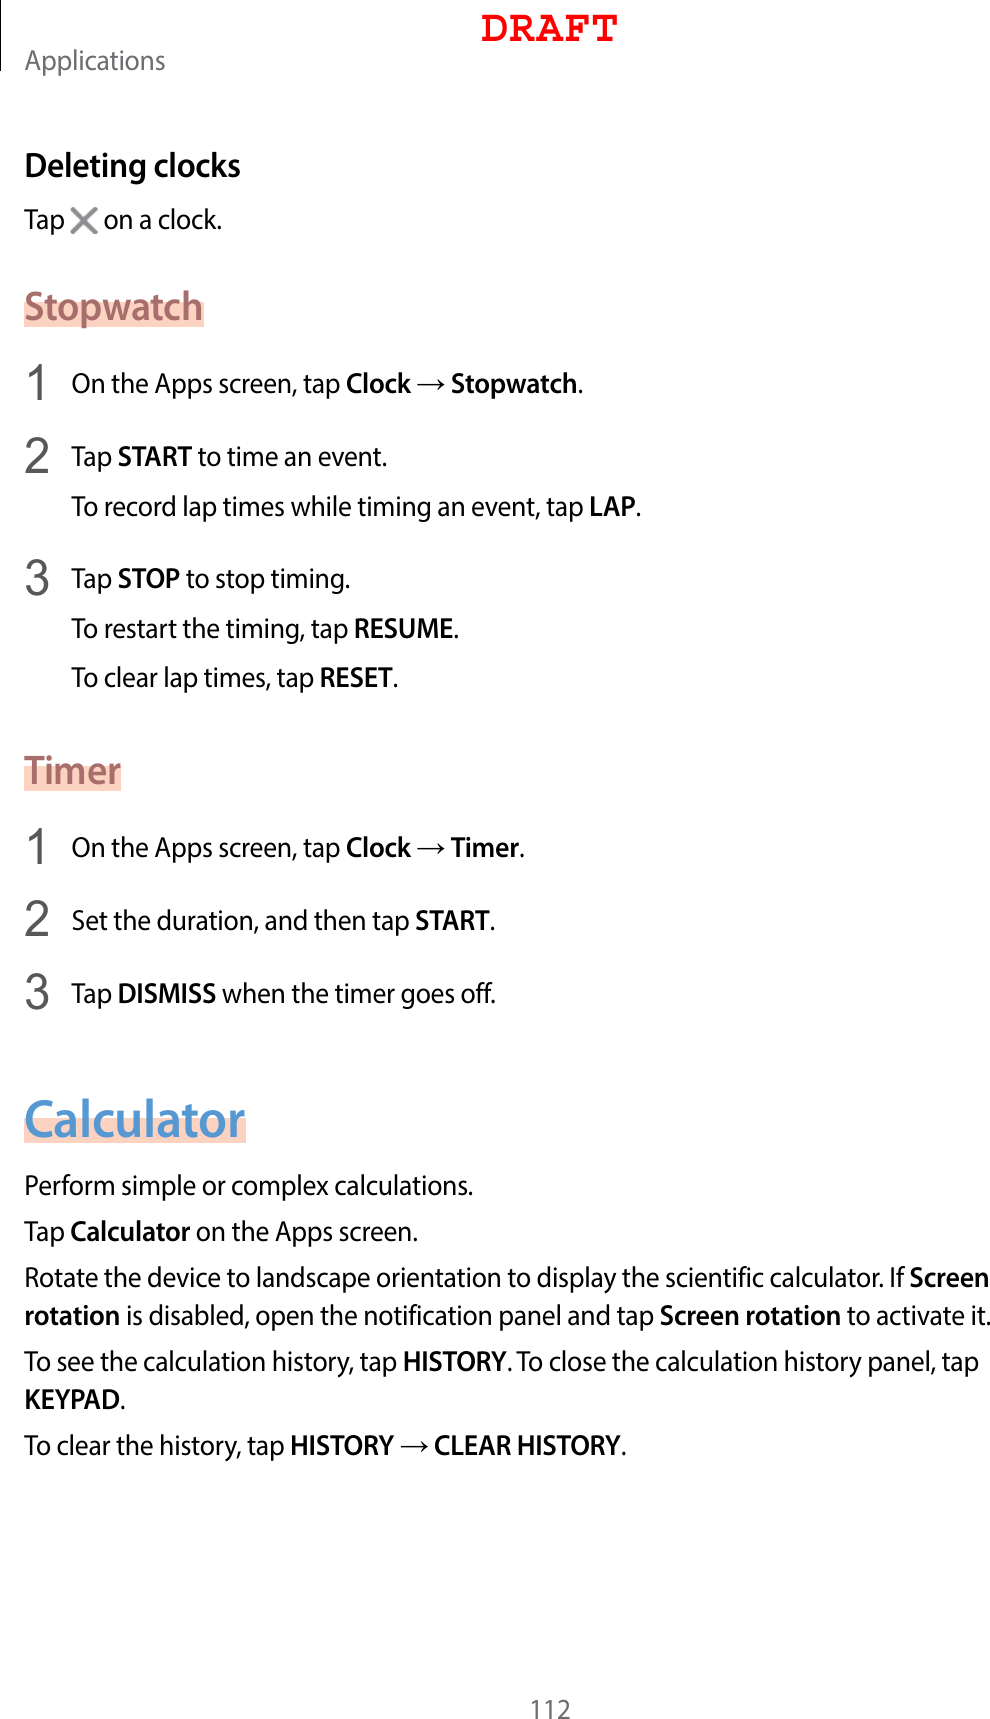 Applications112Deleting clocksTap   on a clock.Stopwatch1  On the Apps screen, tap Clock  Stopwatch.2  Tap START to time an event.To record lap times while timing an event, tap LAP.3  Tap STOP to stop timing.To restart the timing, tap RESUME.To clear lap times, tap RESET.Timer1  On the Apps screen, tap Clock  Timer.2  Set the duration, and then tap START.3  Tap DISMISS when the timer goes off.CalculatorPerform simple or complex calculations.Tap Calculator on the Apps screen.Rotate the device to landscape orientation to display the scientific calculator. If Screen rotation is disabled, open the notification panel and tap Screen rotation to activate it.To see the calculation history, tap HISTORY. To close the calculation history panel, tap KEYPAD.To clear the history, tap HISTORY  CLEAR HISTORY.DRAFT